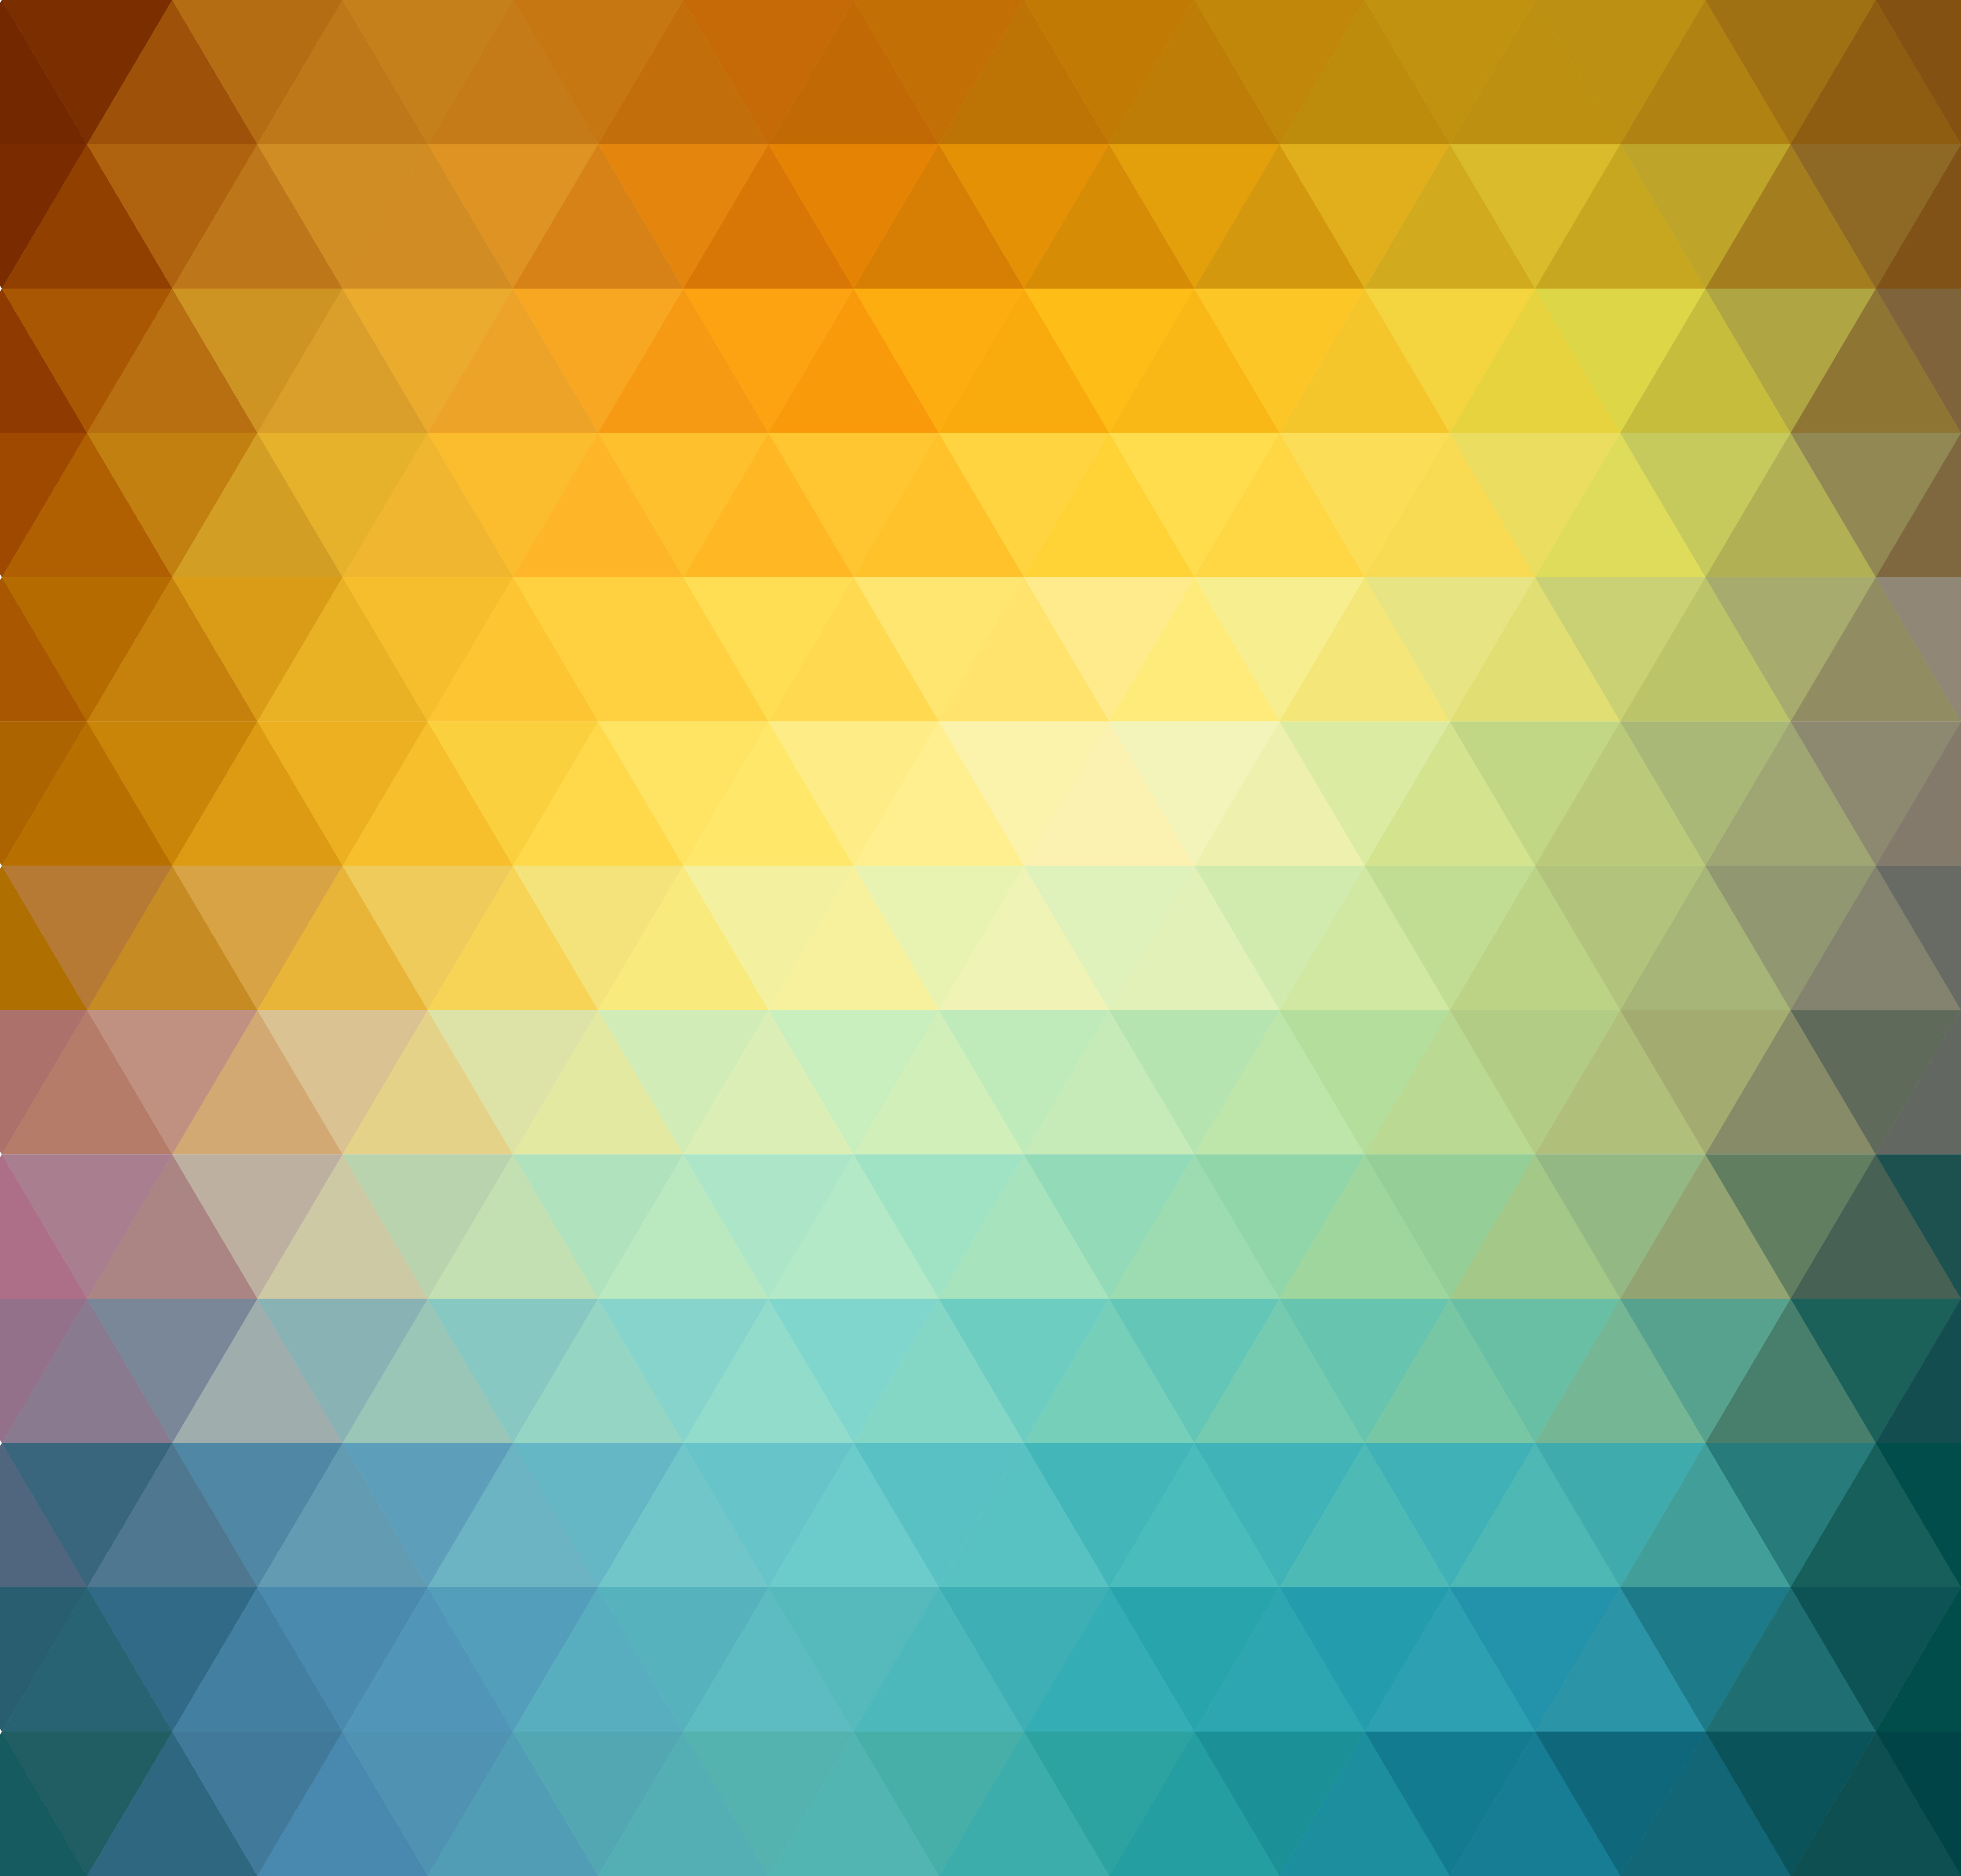 Abstract geometric background with orange, blue and yellow triangles. Summer sunny design, Dreamstime.com-ID72204342 © Strizh, dreamstime_xxl_72204342